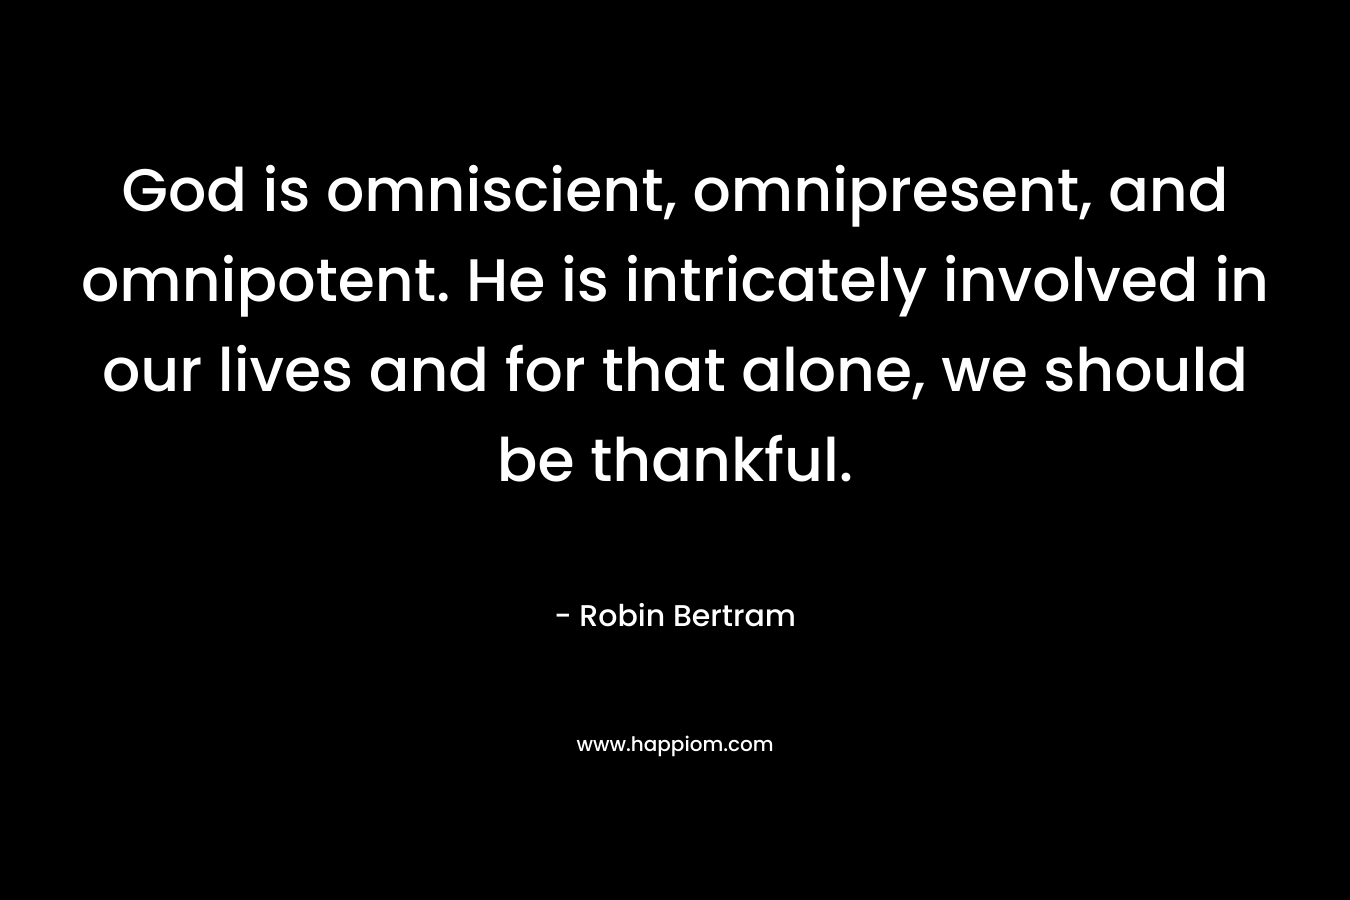 God is omniscient, omnipresent, and omnipotent. He is intricately involved in our lives and for that alone, we should be thankful. – Robin Bertram